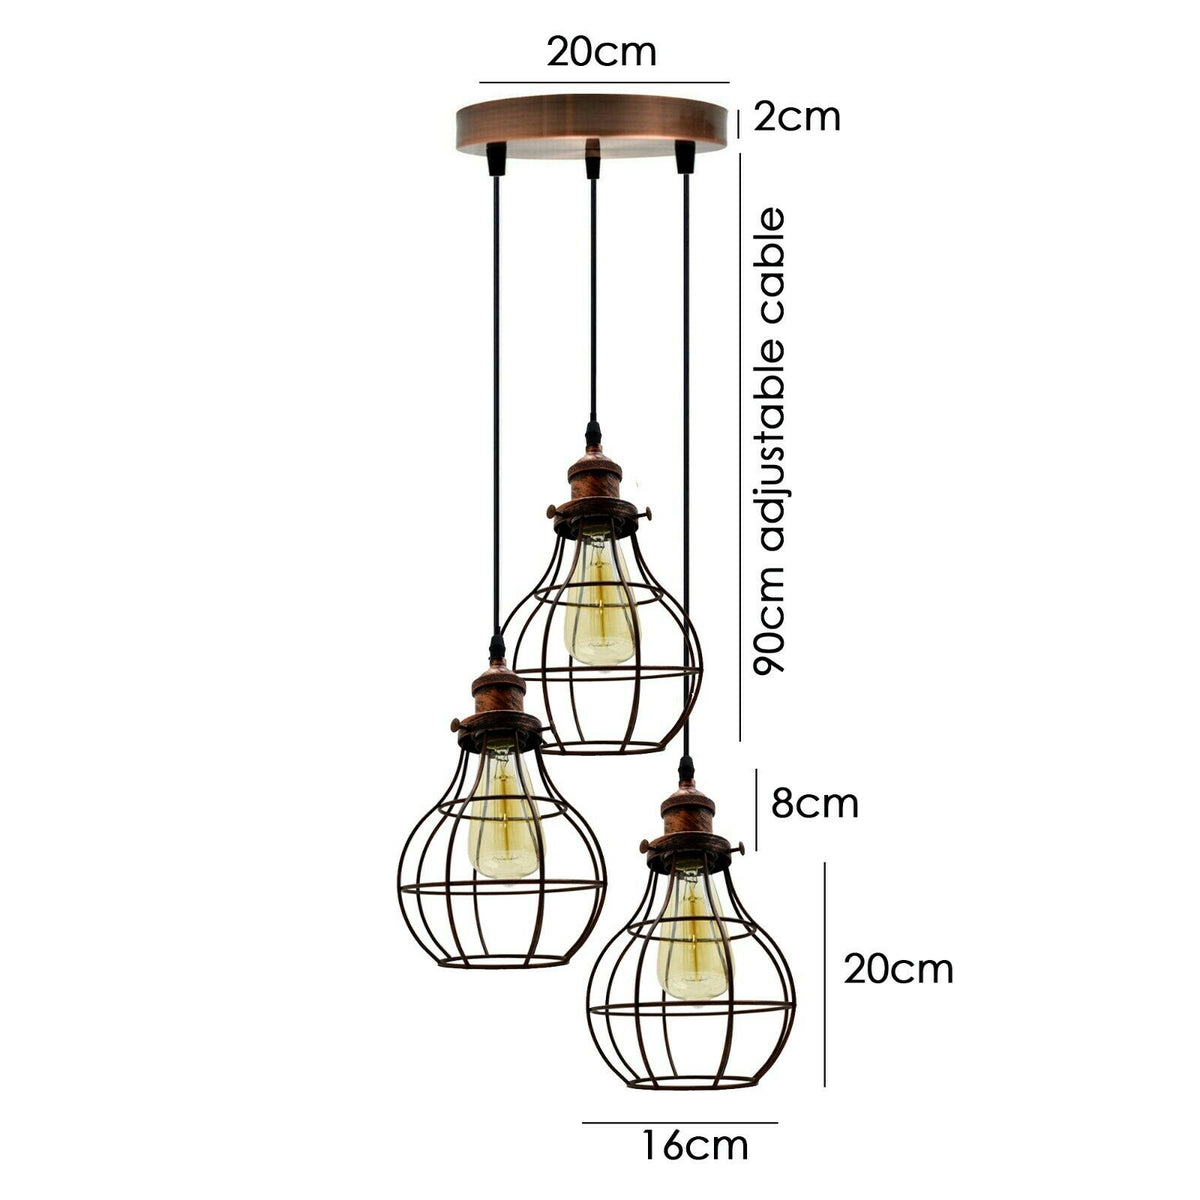 3 Way Ceiling Pendant Cage Cluster Light Fitting Shop For Led